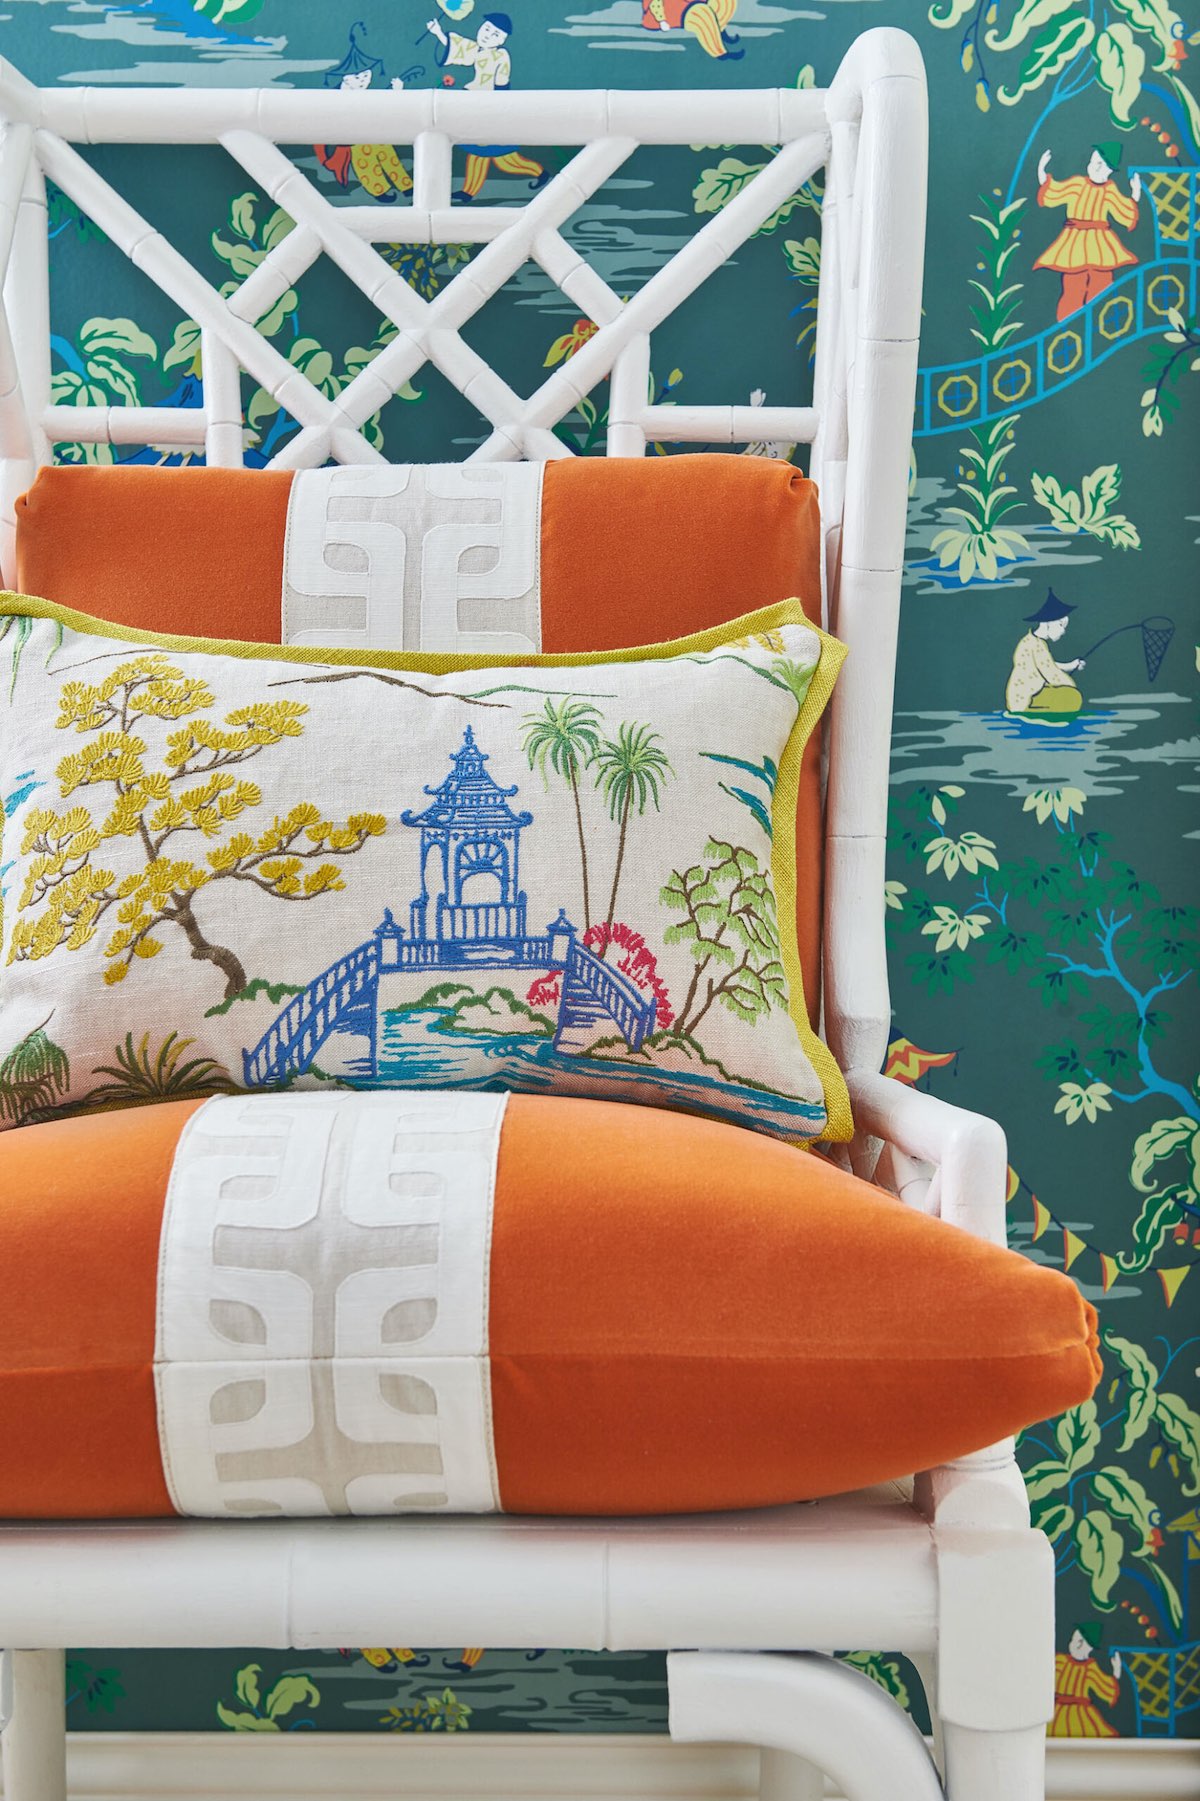 White Chinese-style chair with orange cushions and chinoiserie patterned pillow.